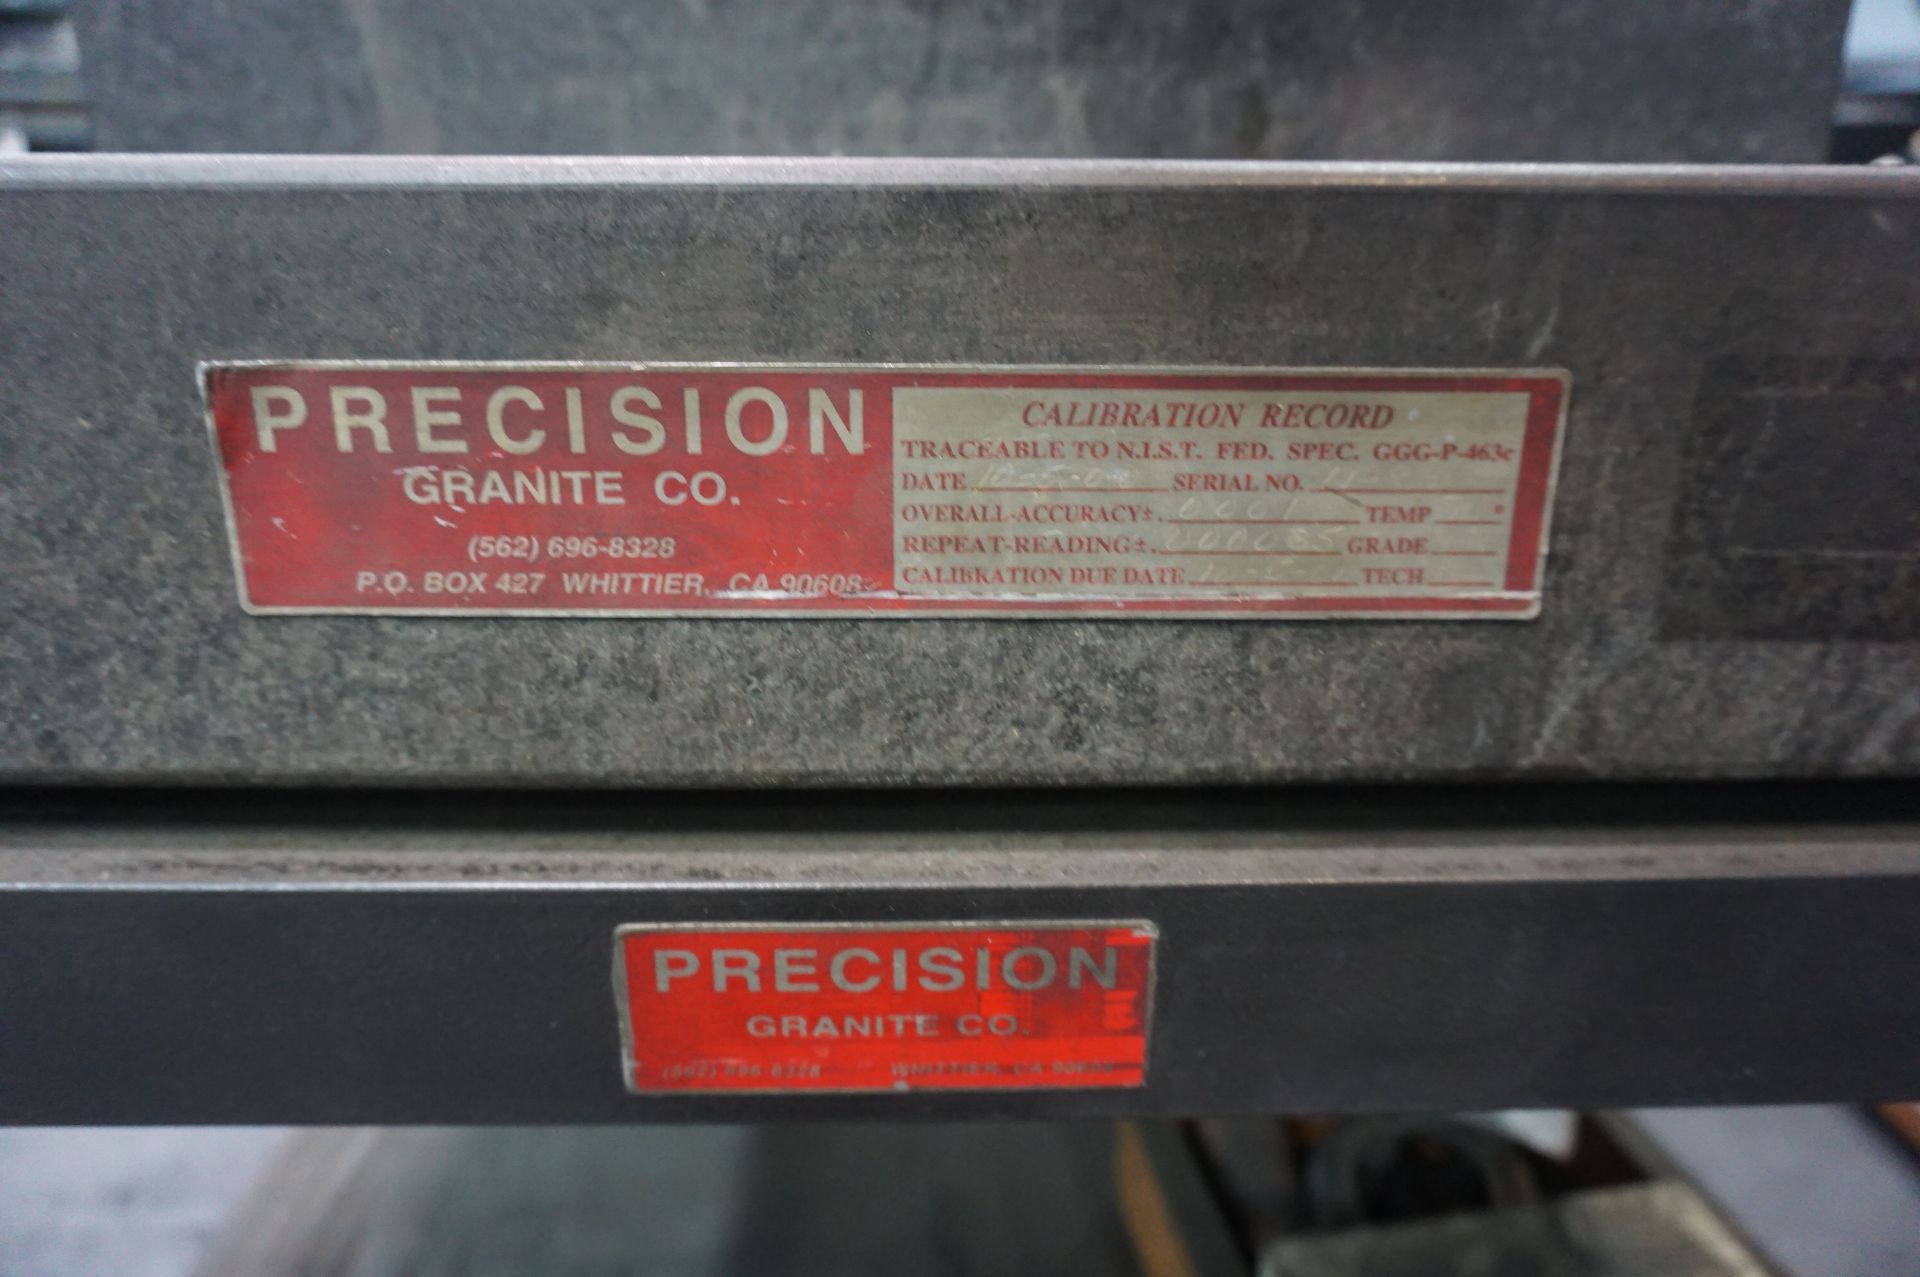 PRECISION GRANITE SURFACE PLATE WITH ROLLING STEEL CART, DIMENSIONS 36" X 24" - Image 4 of 4